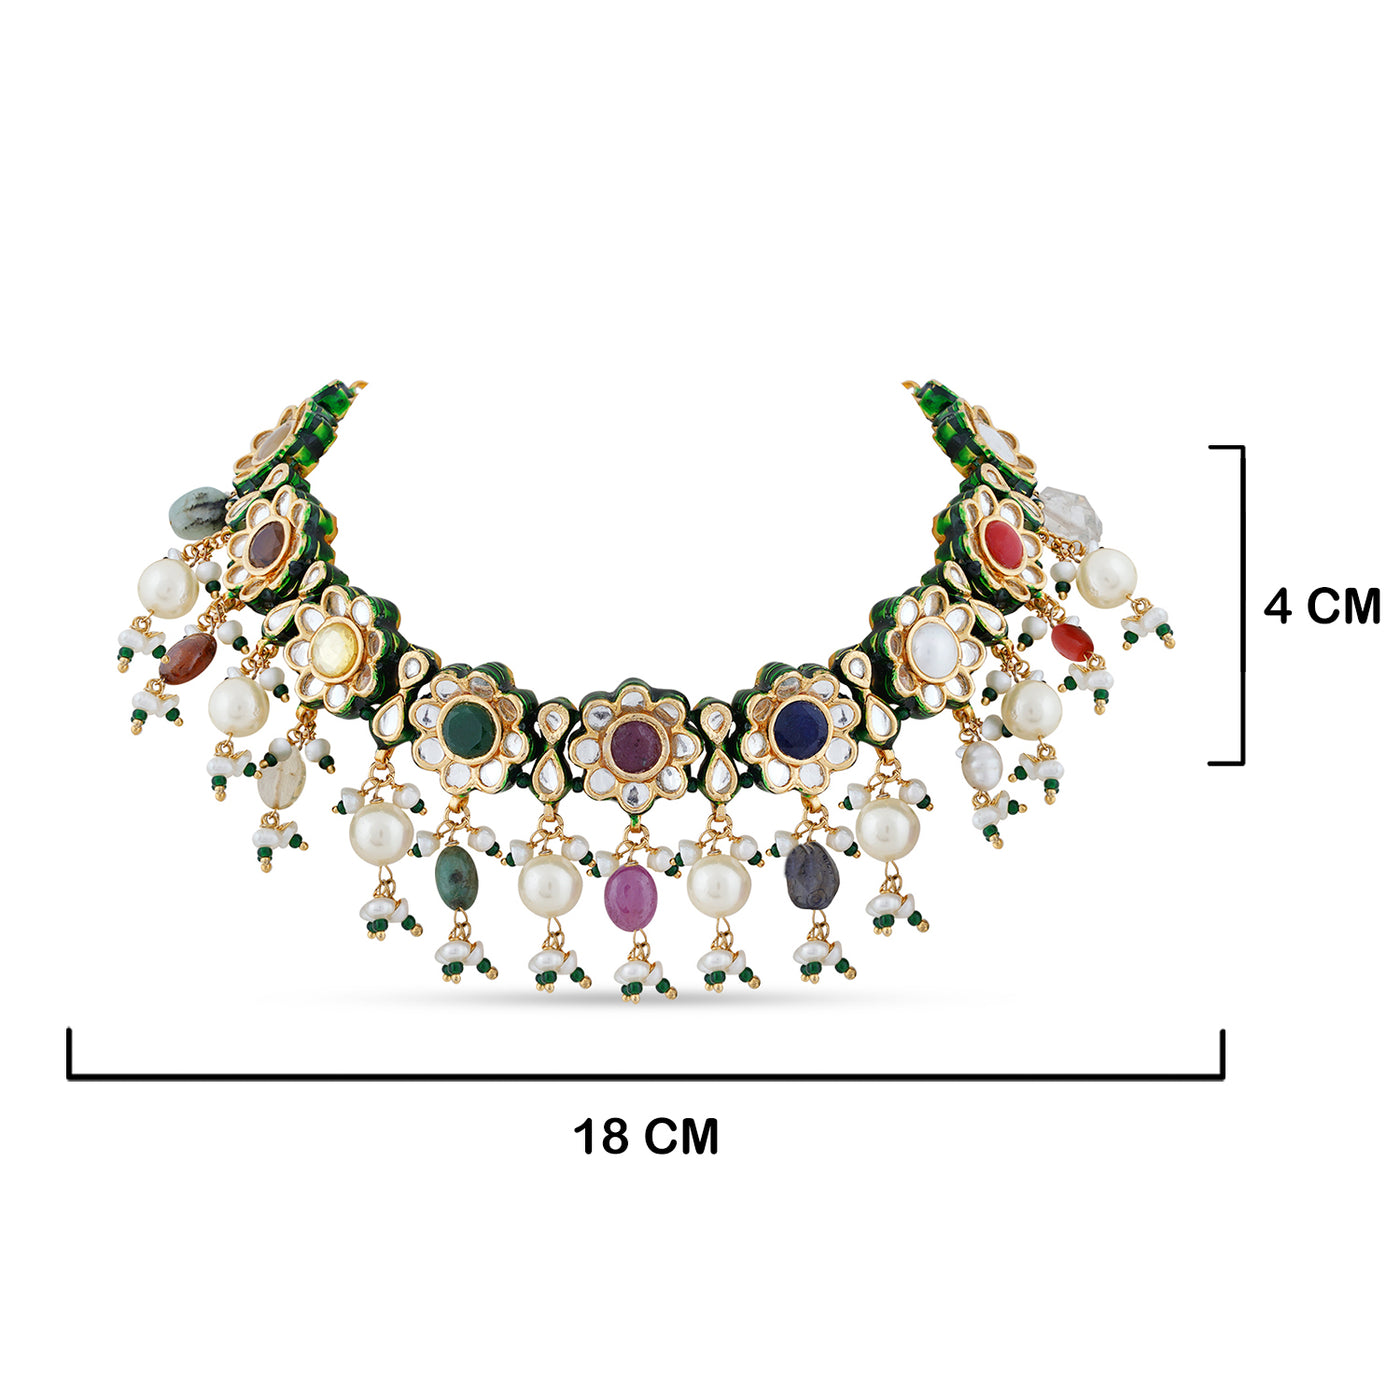  Multi Coloured Stone Choker withb measurements in cm. 18cm by 4cm.